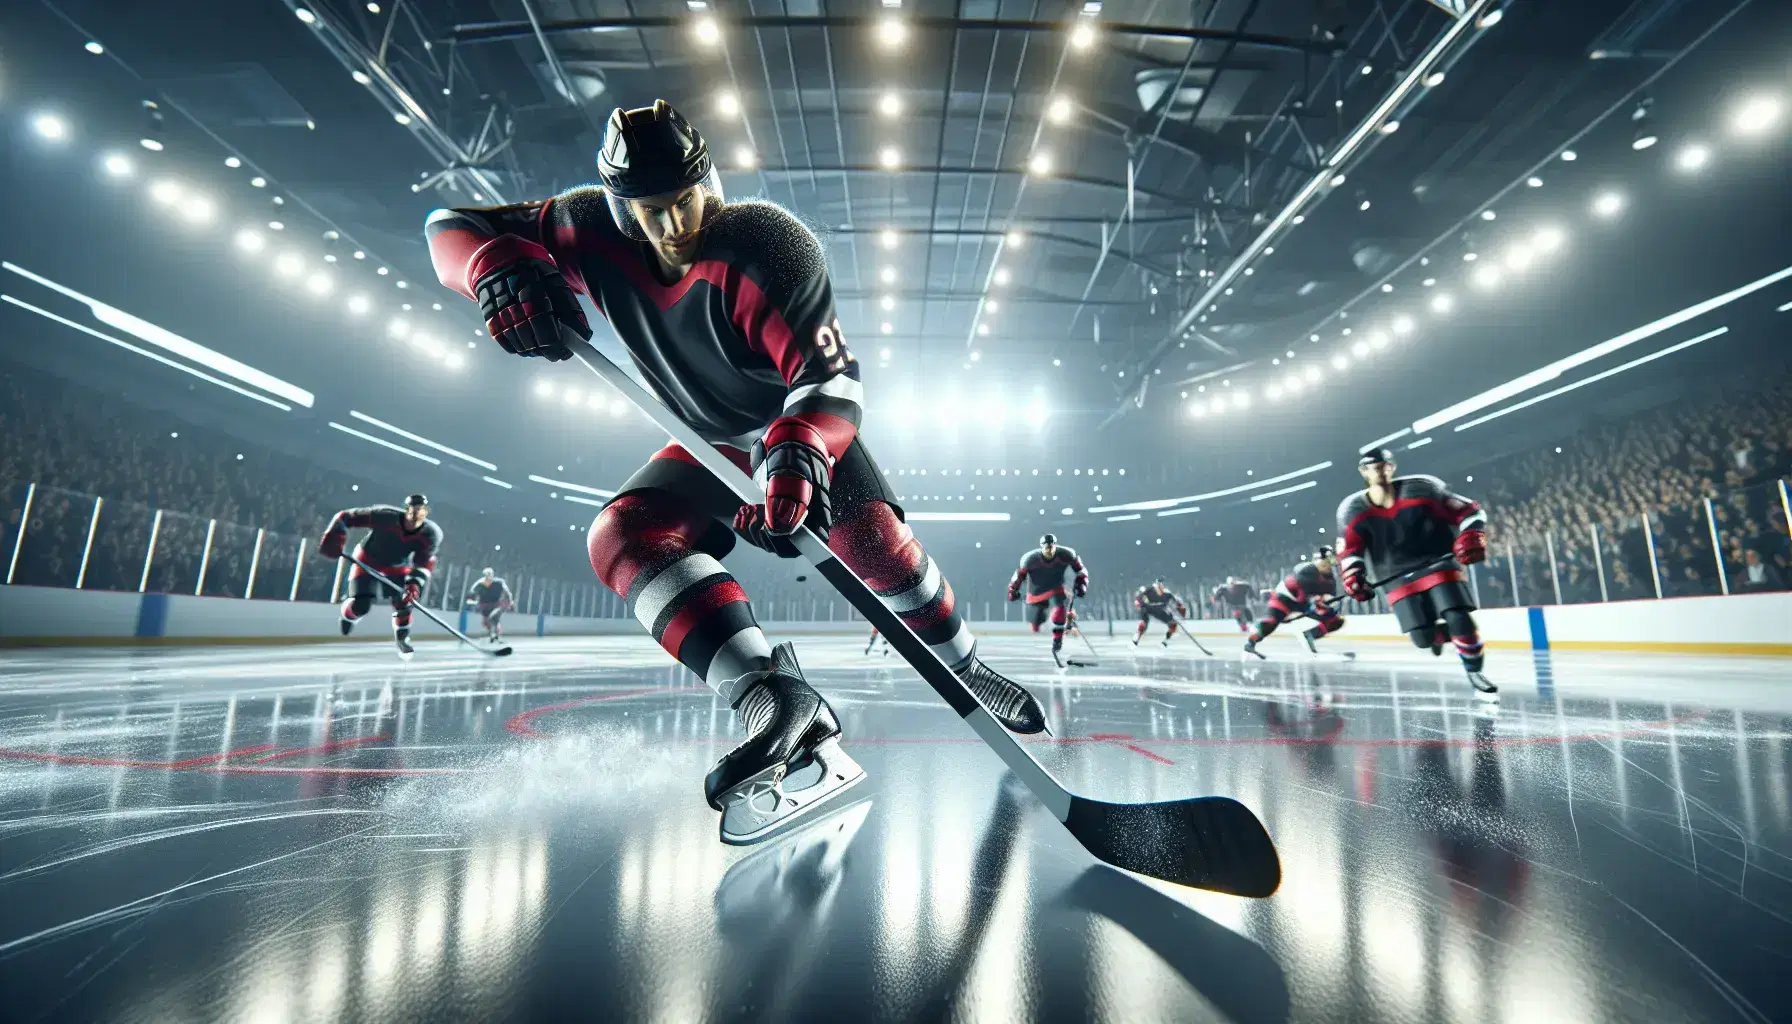 Ice hockey game with player in red and black uniform handling the puck, teammates and opponents in action, blurred audience in the background.